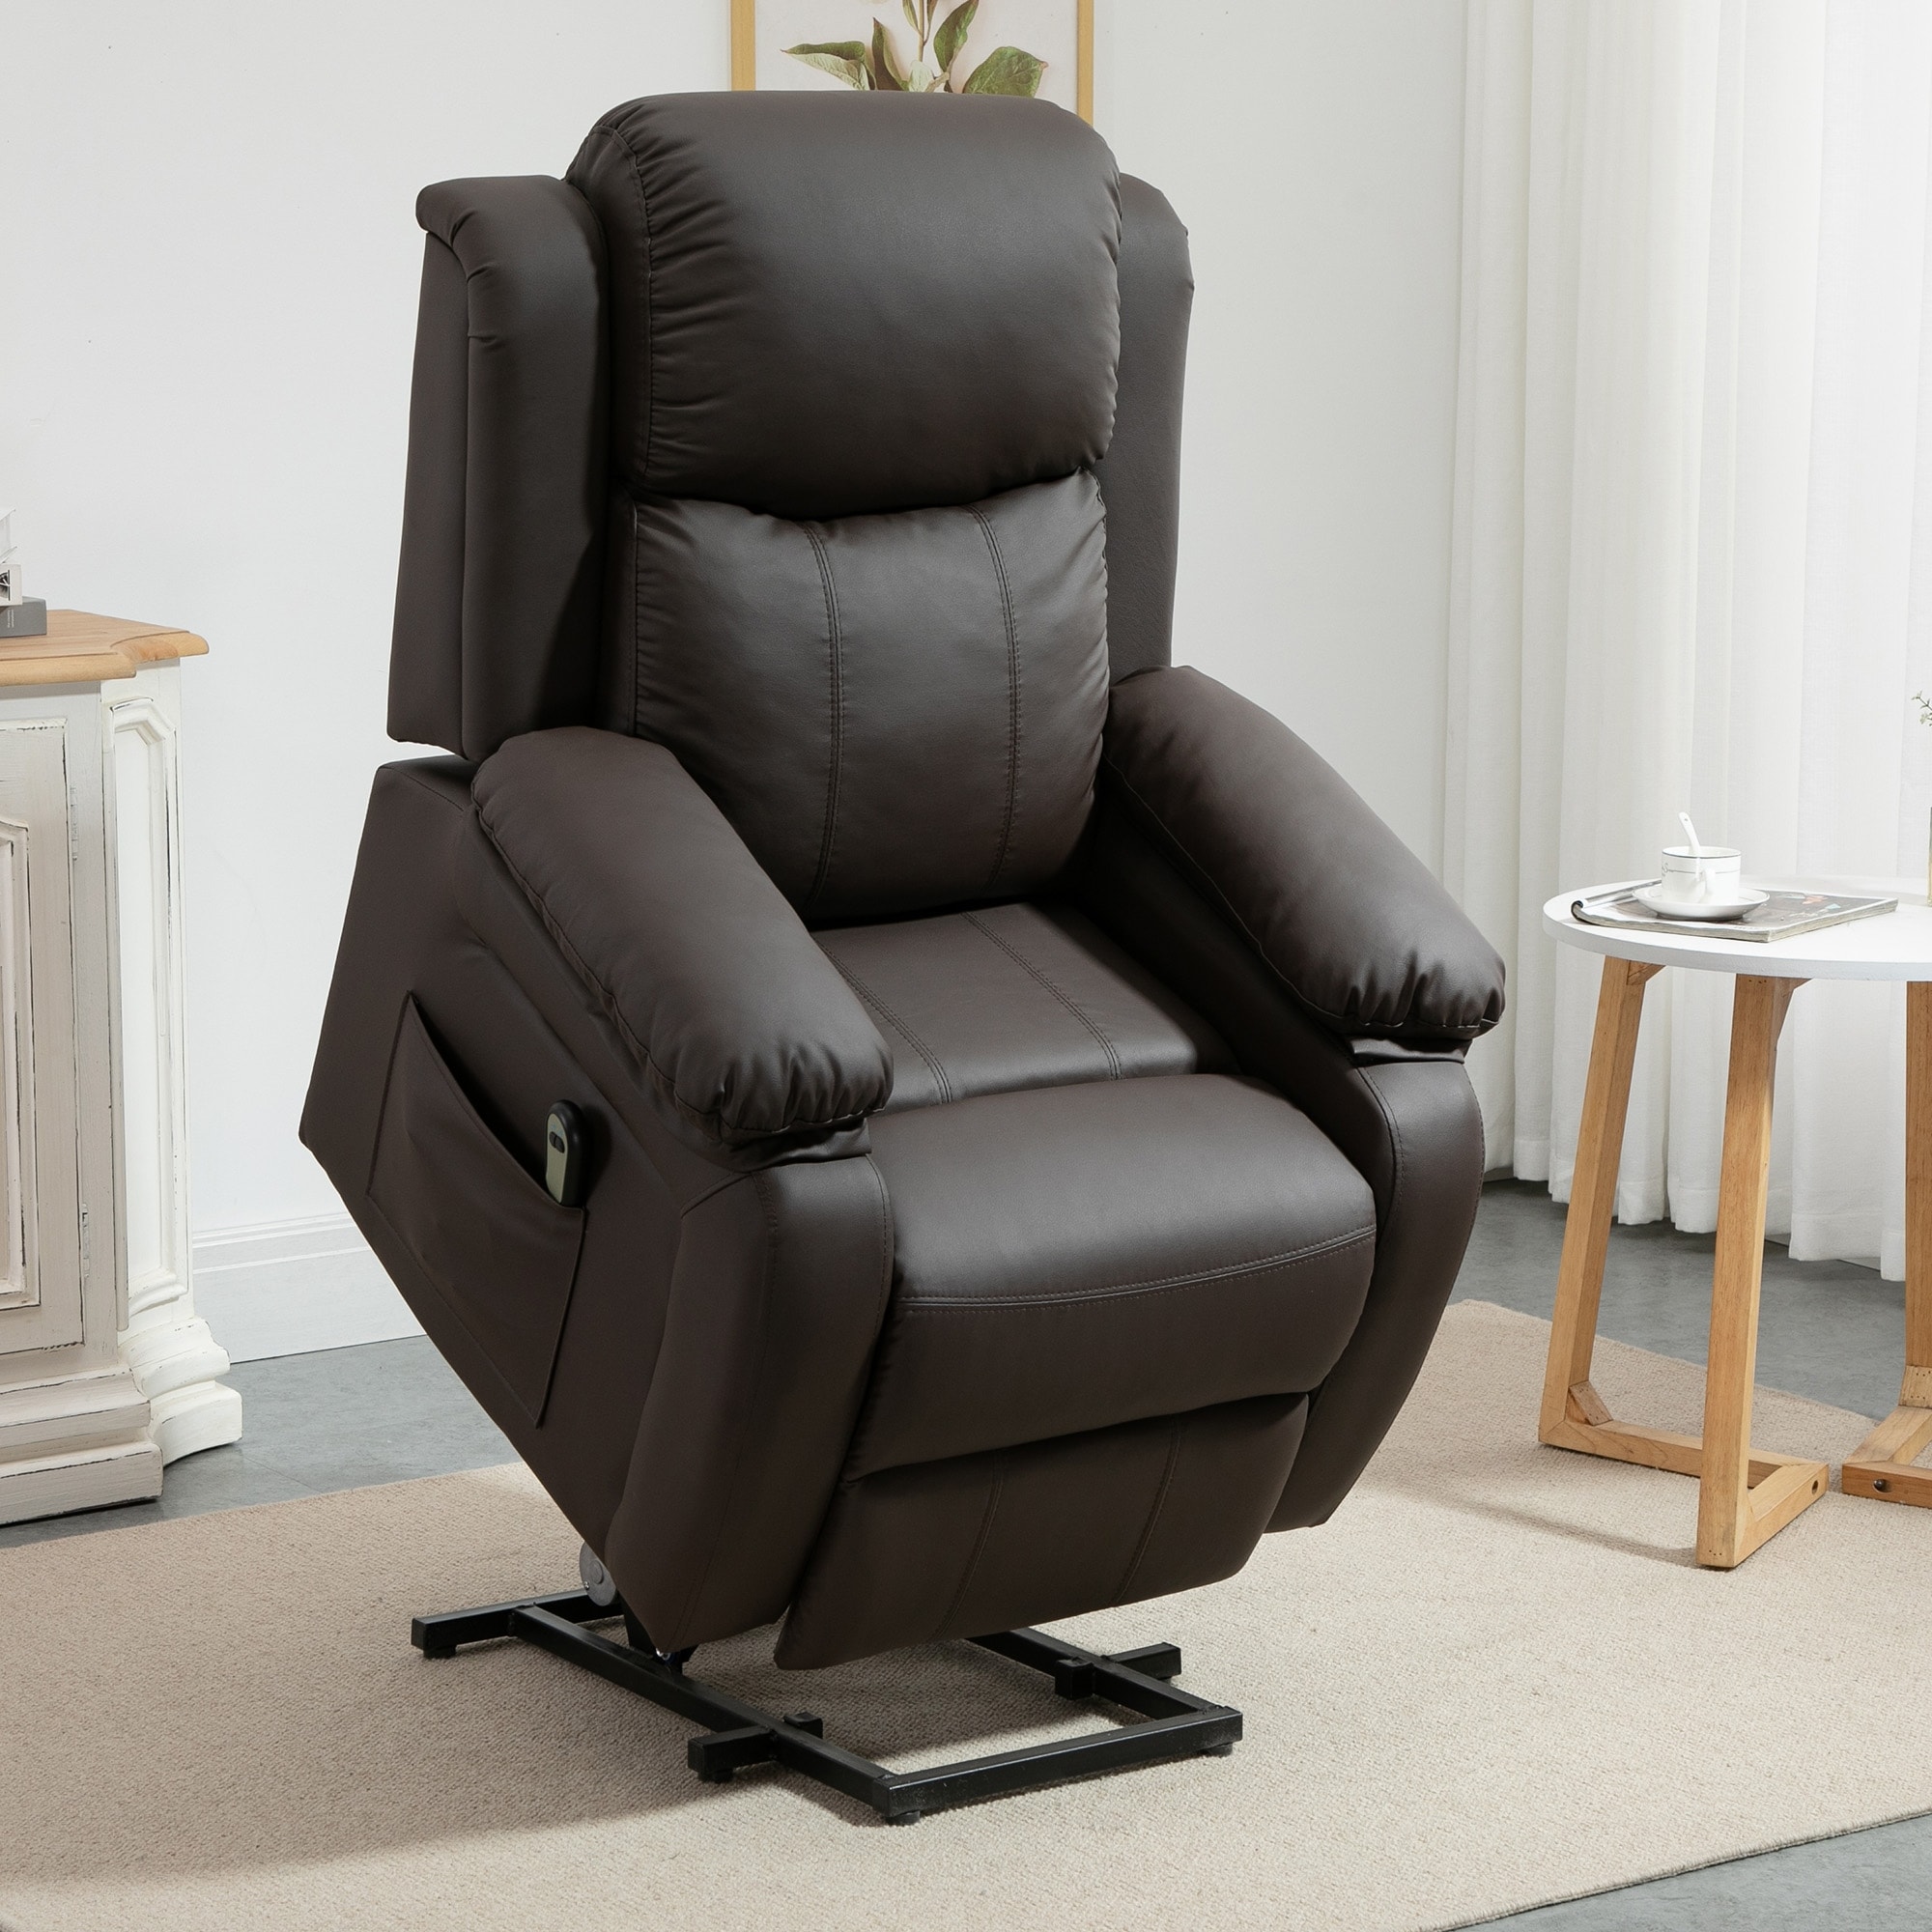 Homcom Living Room Power Lift Chair  Pu Leather Electric Recliner Sofa Chair For Elderly With Remote Control